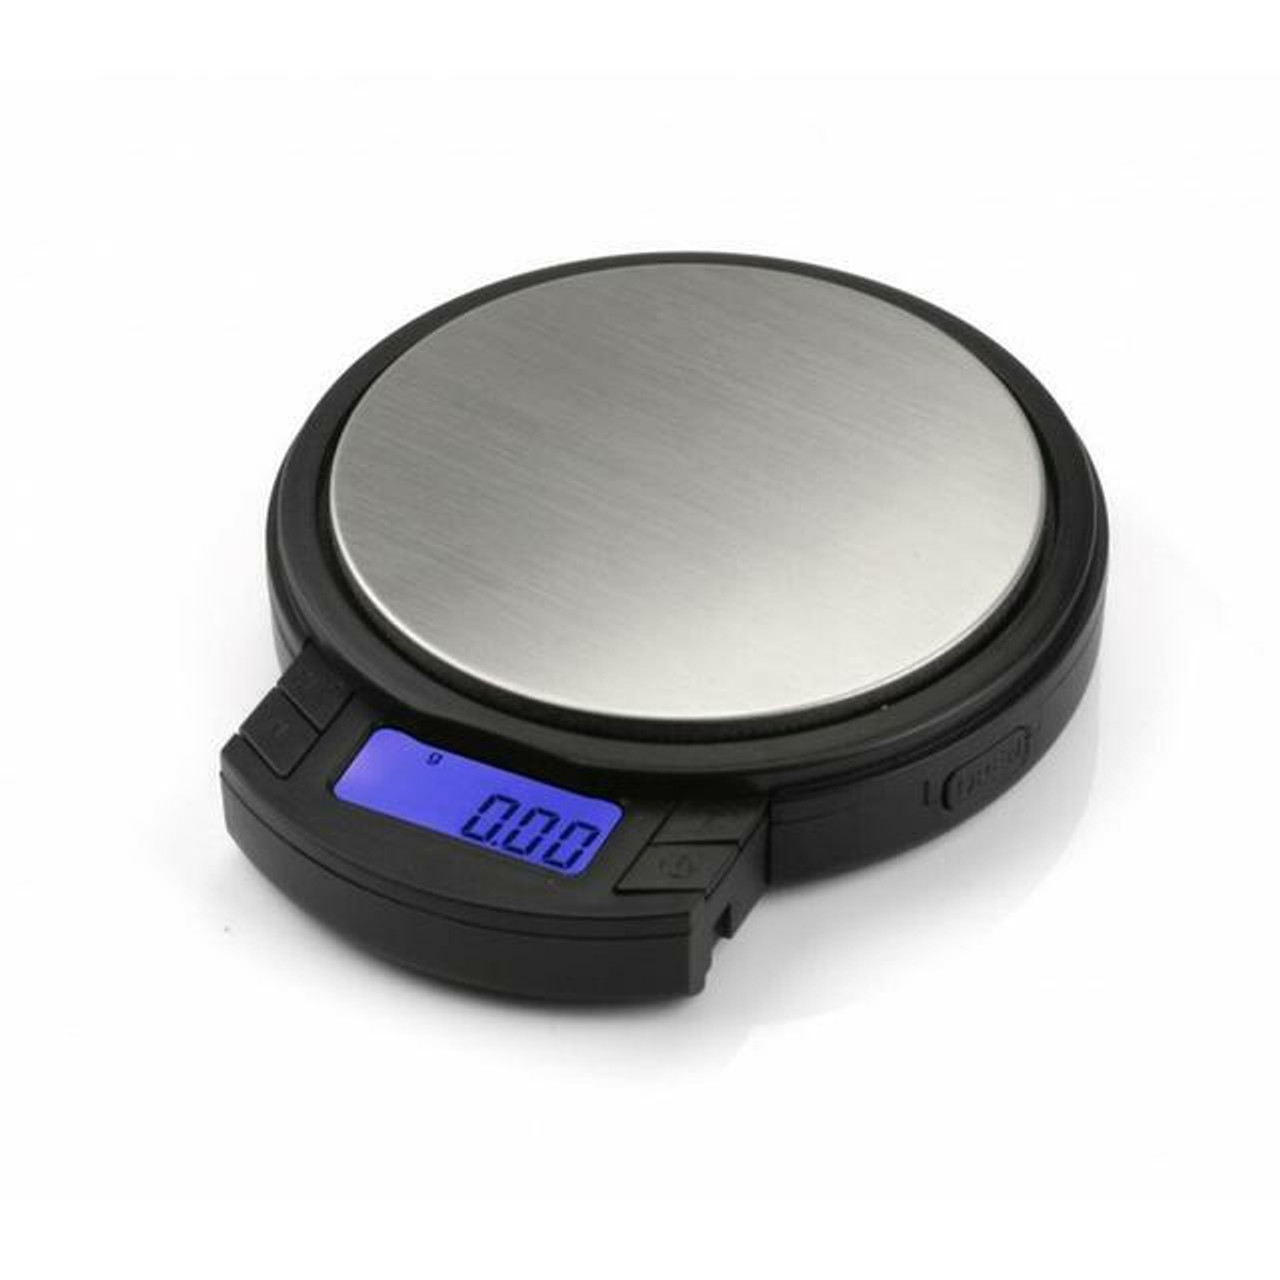 https://cdn11.bigcommerce.com/s-errhy7umuu/images/stencil/1280x1280/products/12338/34841/american-weigh-scales-aws-axis-100-precision-bowl-digital-pocket-scale-100-g-x-0.01-g__11576.1655243454.jpg?c=2